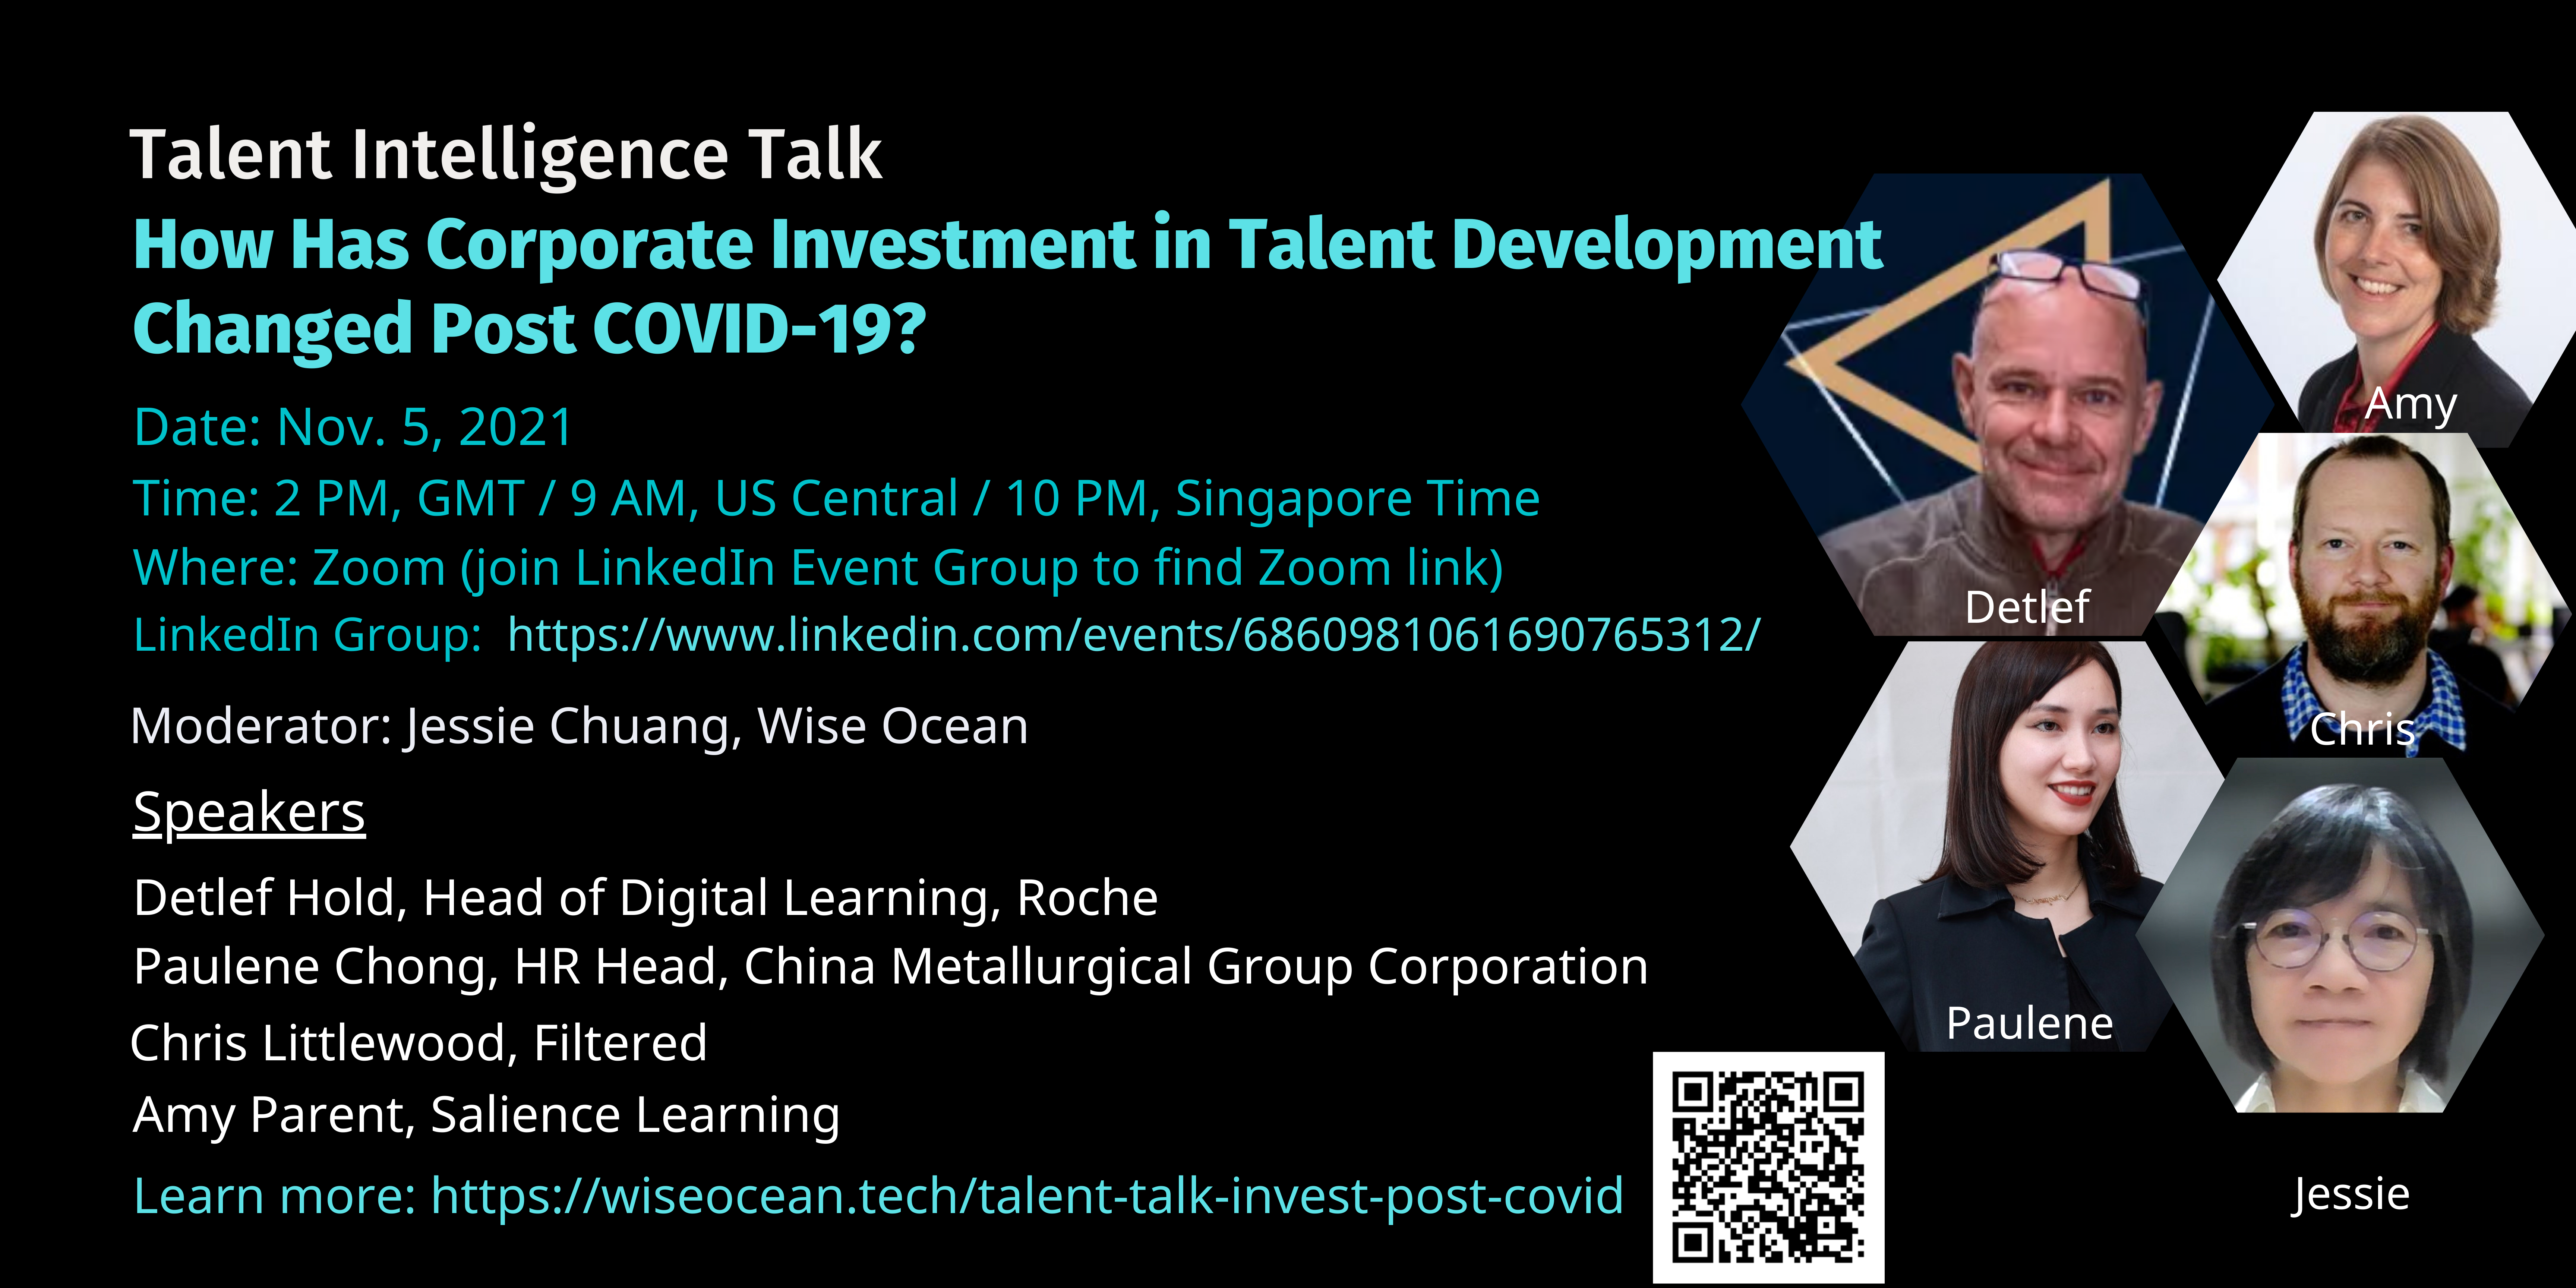 Talent Intelligence Talk – How has Corporate Investment in Talent Dev. Changed Post COVID-19?